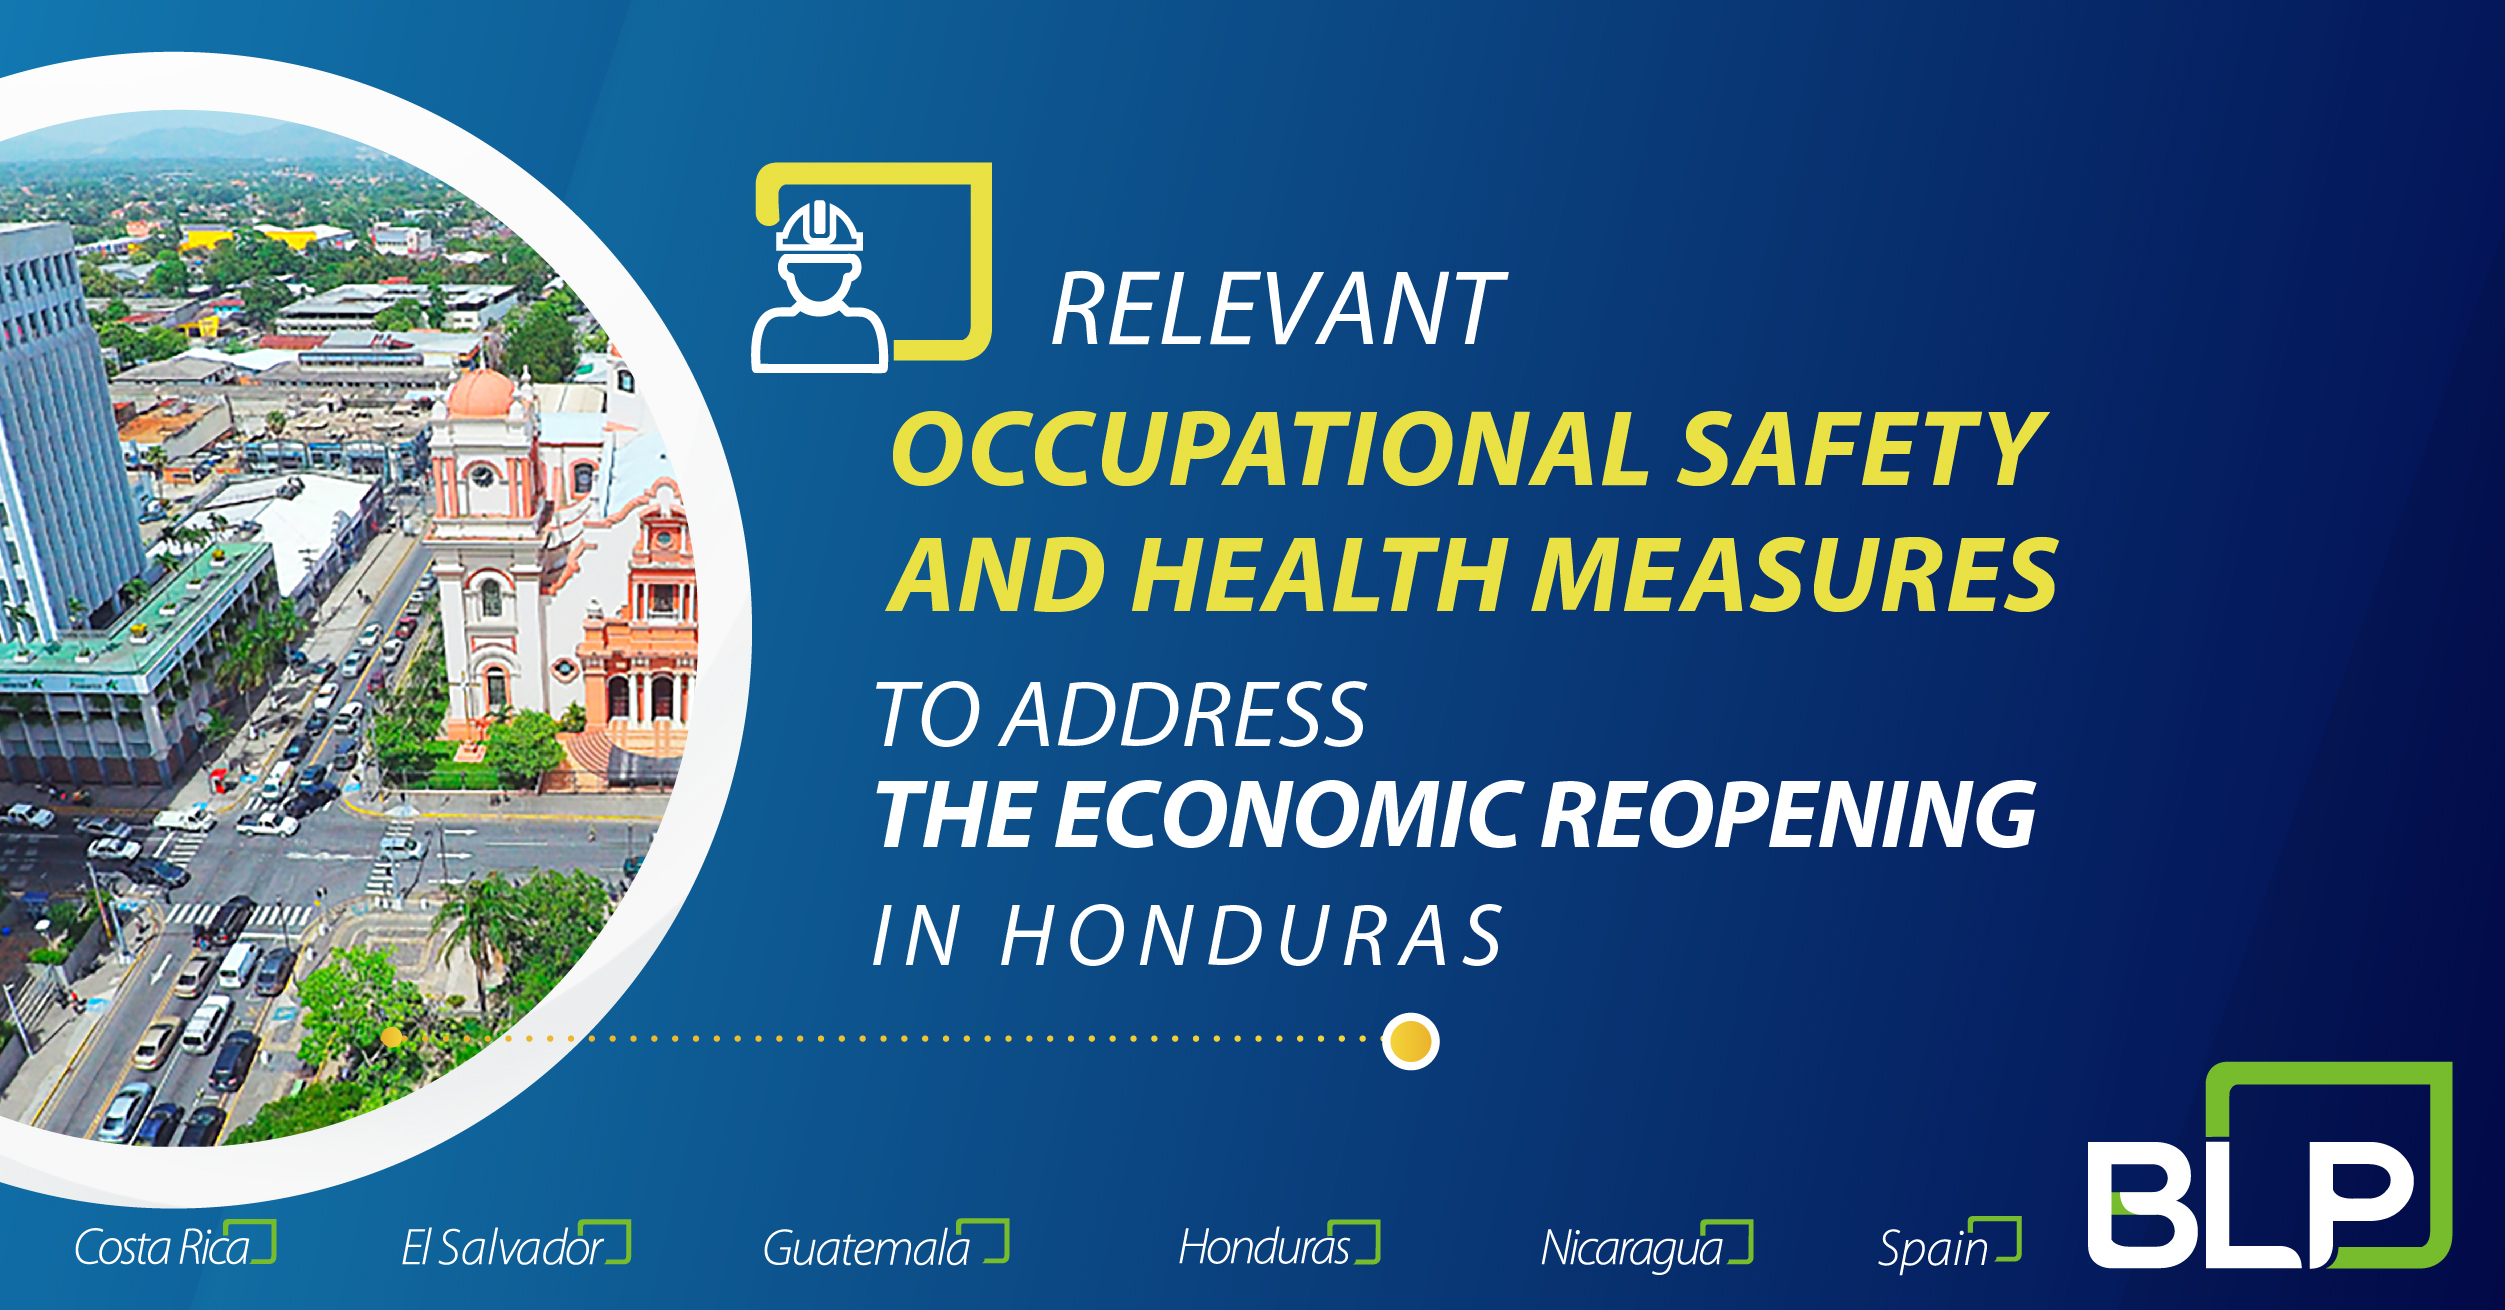 Relevant matters on Occupation Health and Safety to address the economic reopening in Honduras